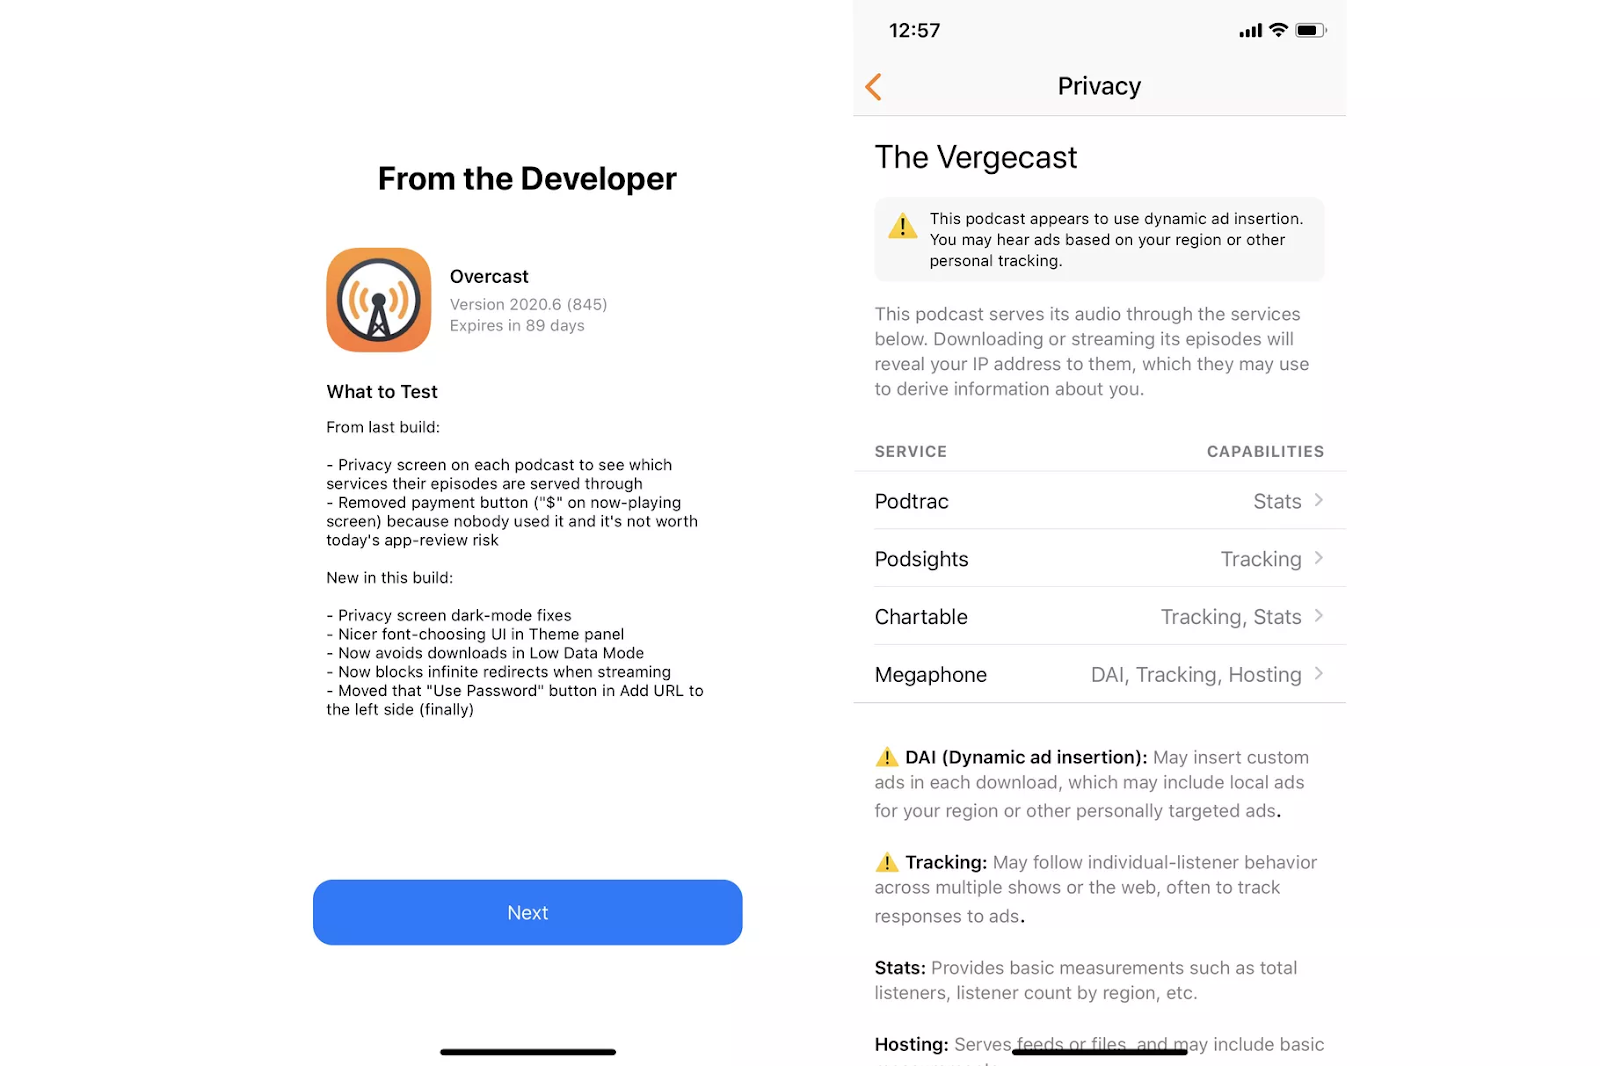 Left: Screenshot of the Overcast app update details. Right: An example of The Vergecast data and ad information in Overcast.